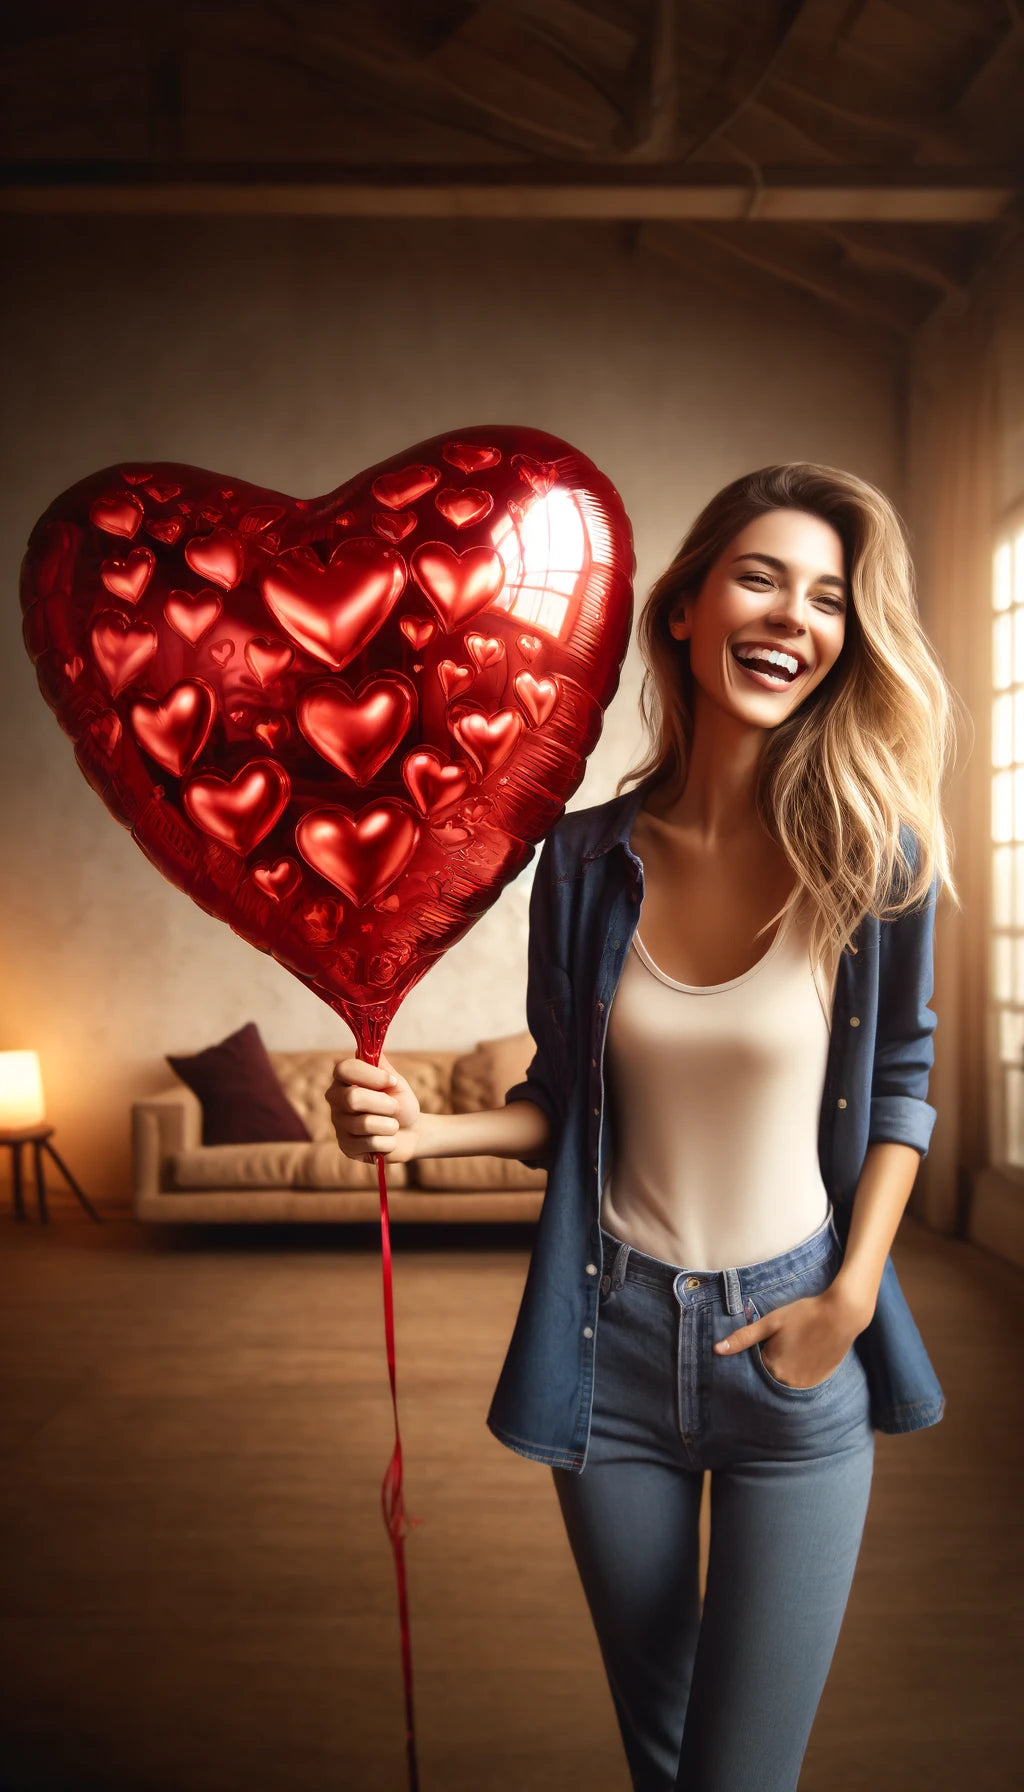 DALL·E 2024-04-16 16.22.51 - Create an image of a woman standing and holding a large heart-shaped balloon in her right hand. The balloon should be glossy and red, filled with smal.webp__PID:52ab2234-a11e-431b-9529-925fd7ad569d